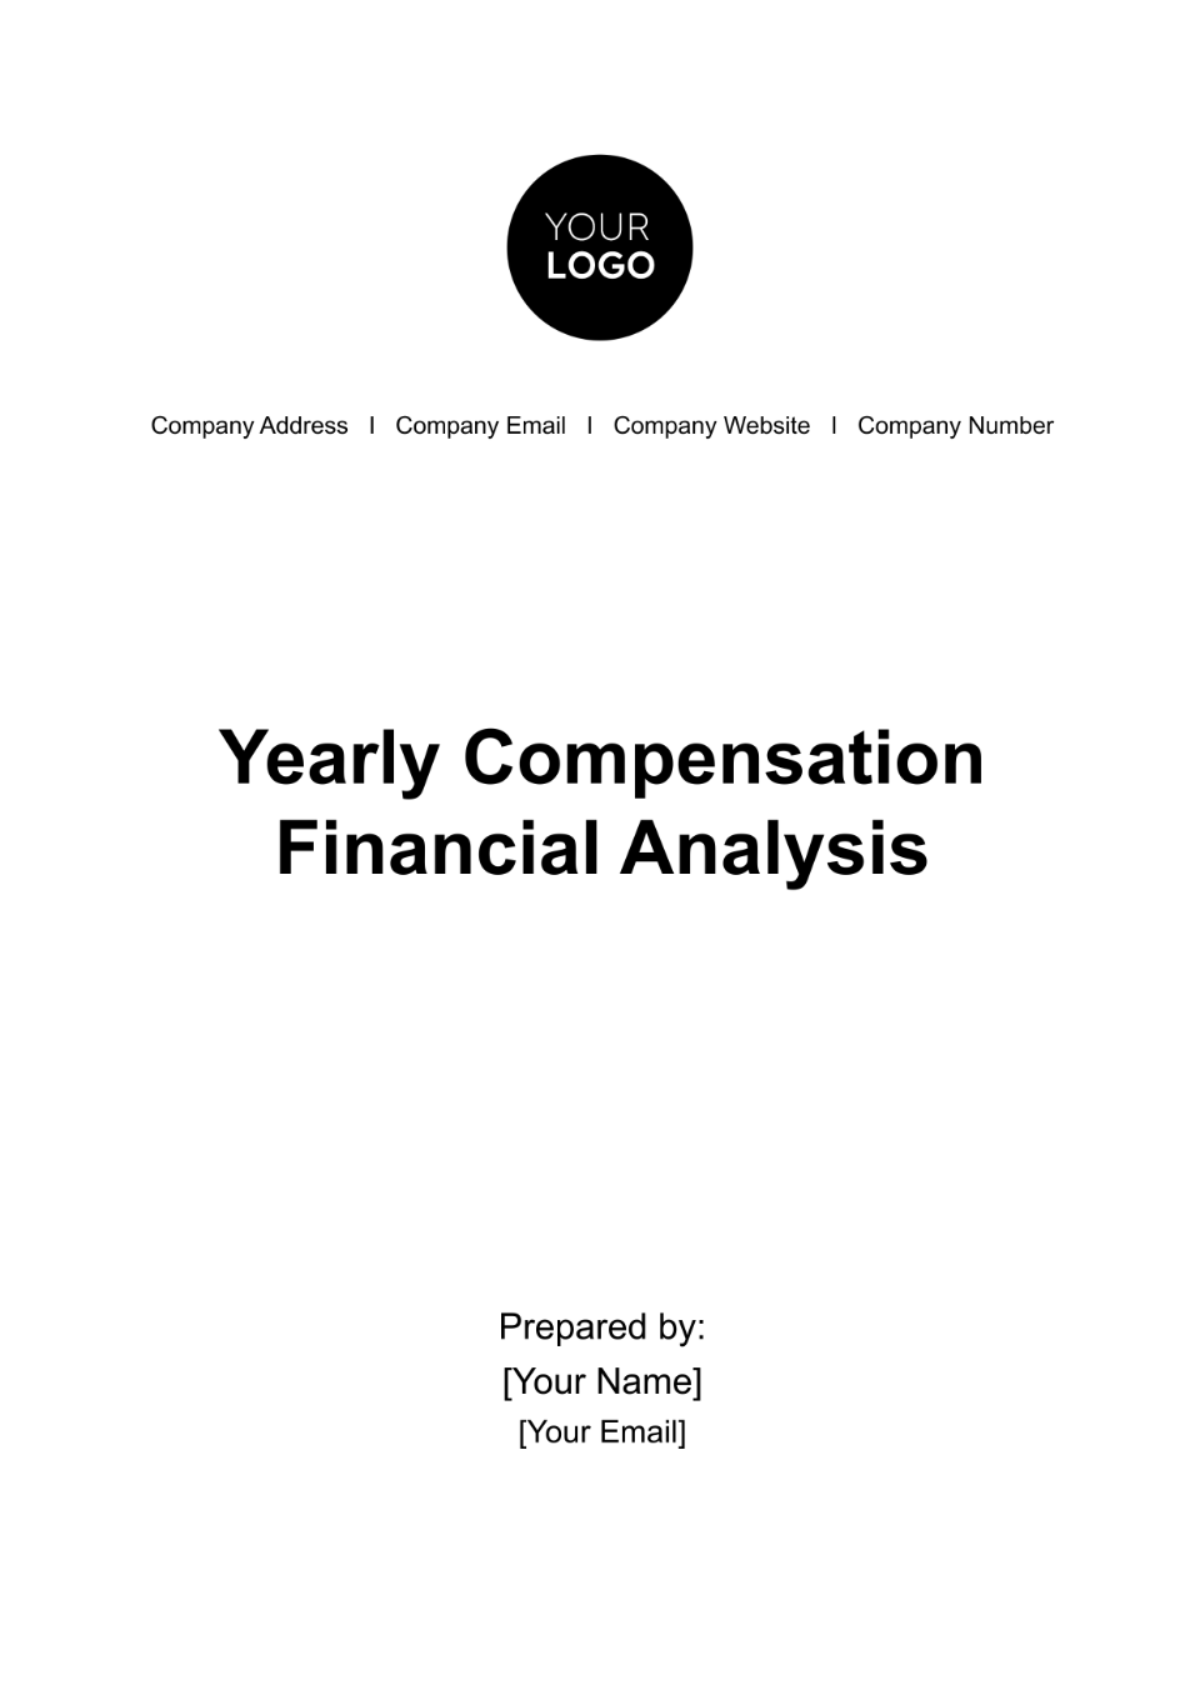 Free Yearly Compensation Financial Analysis HR Template